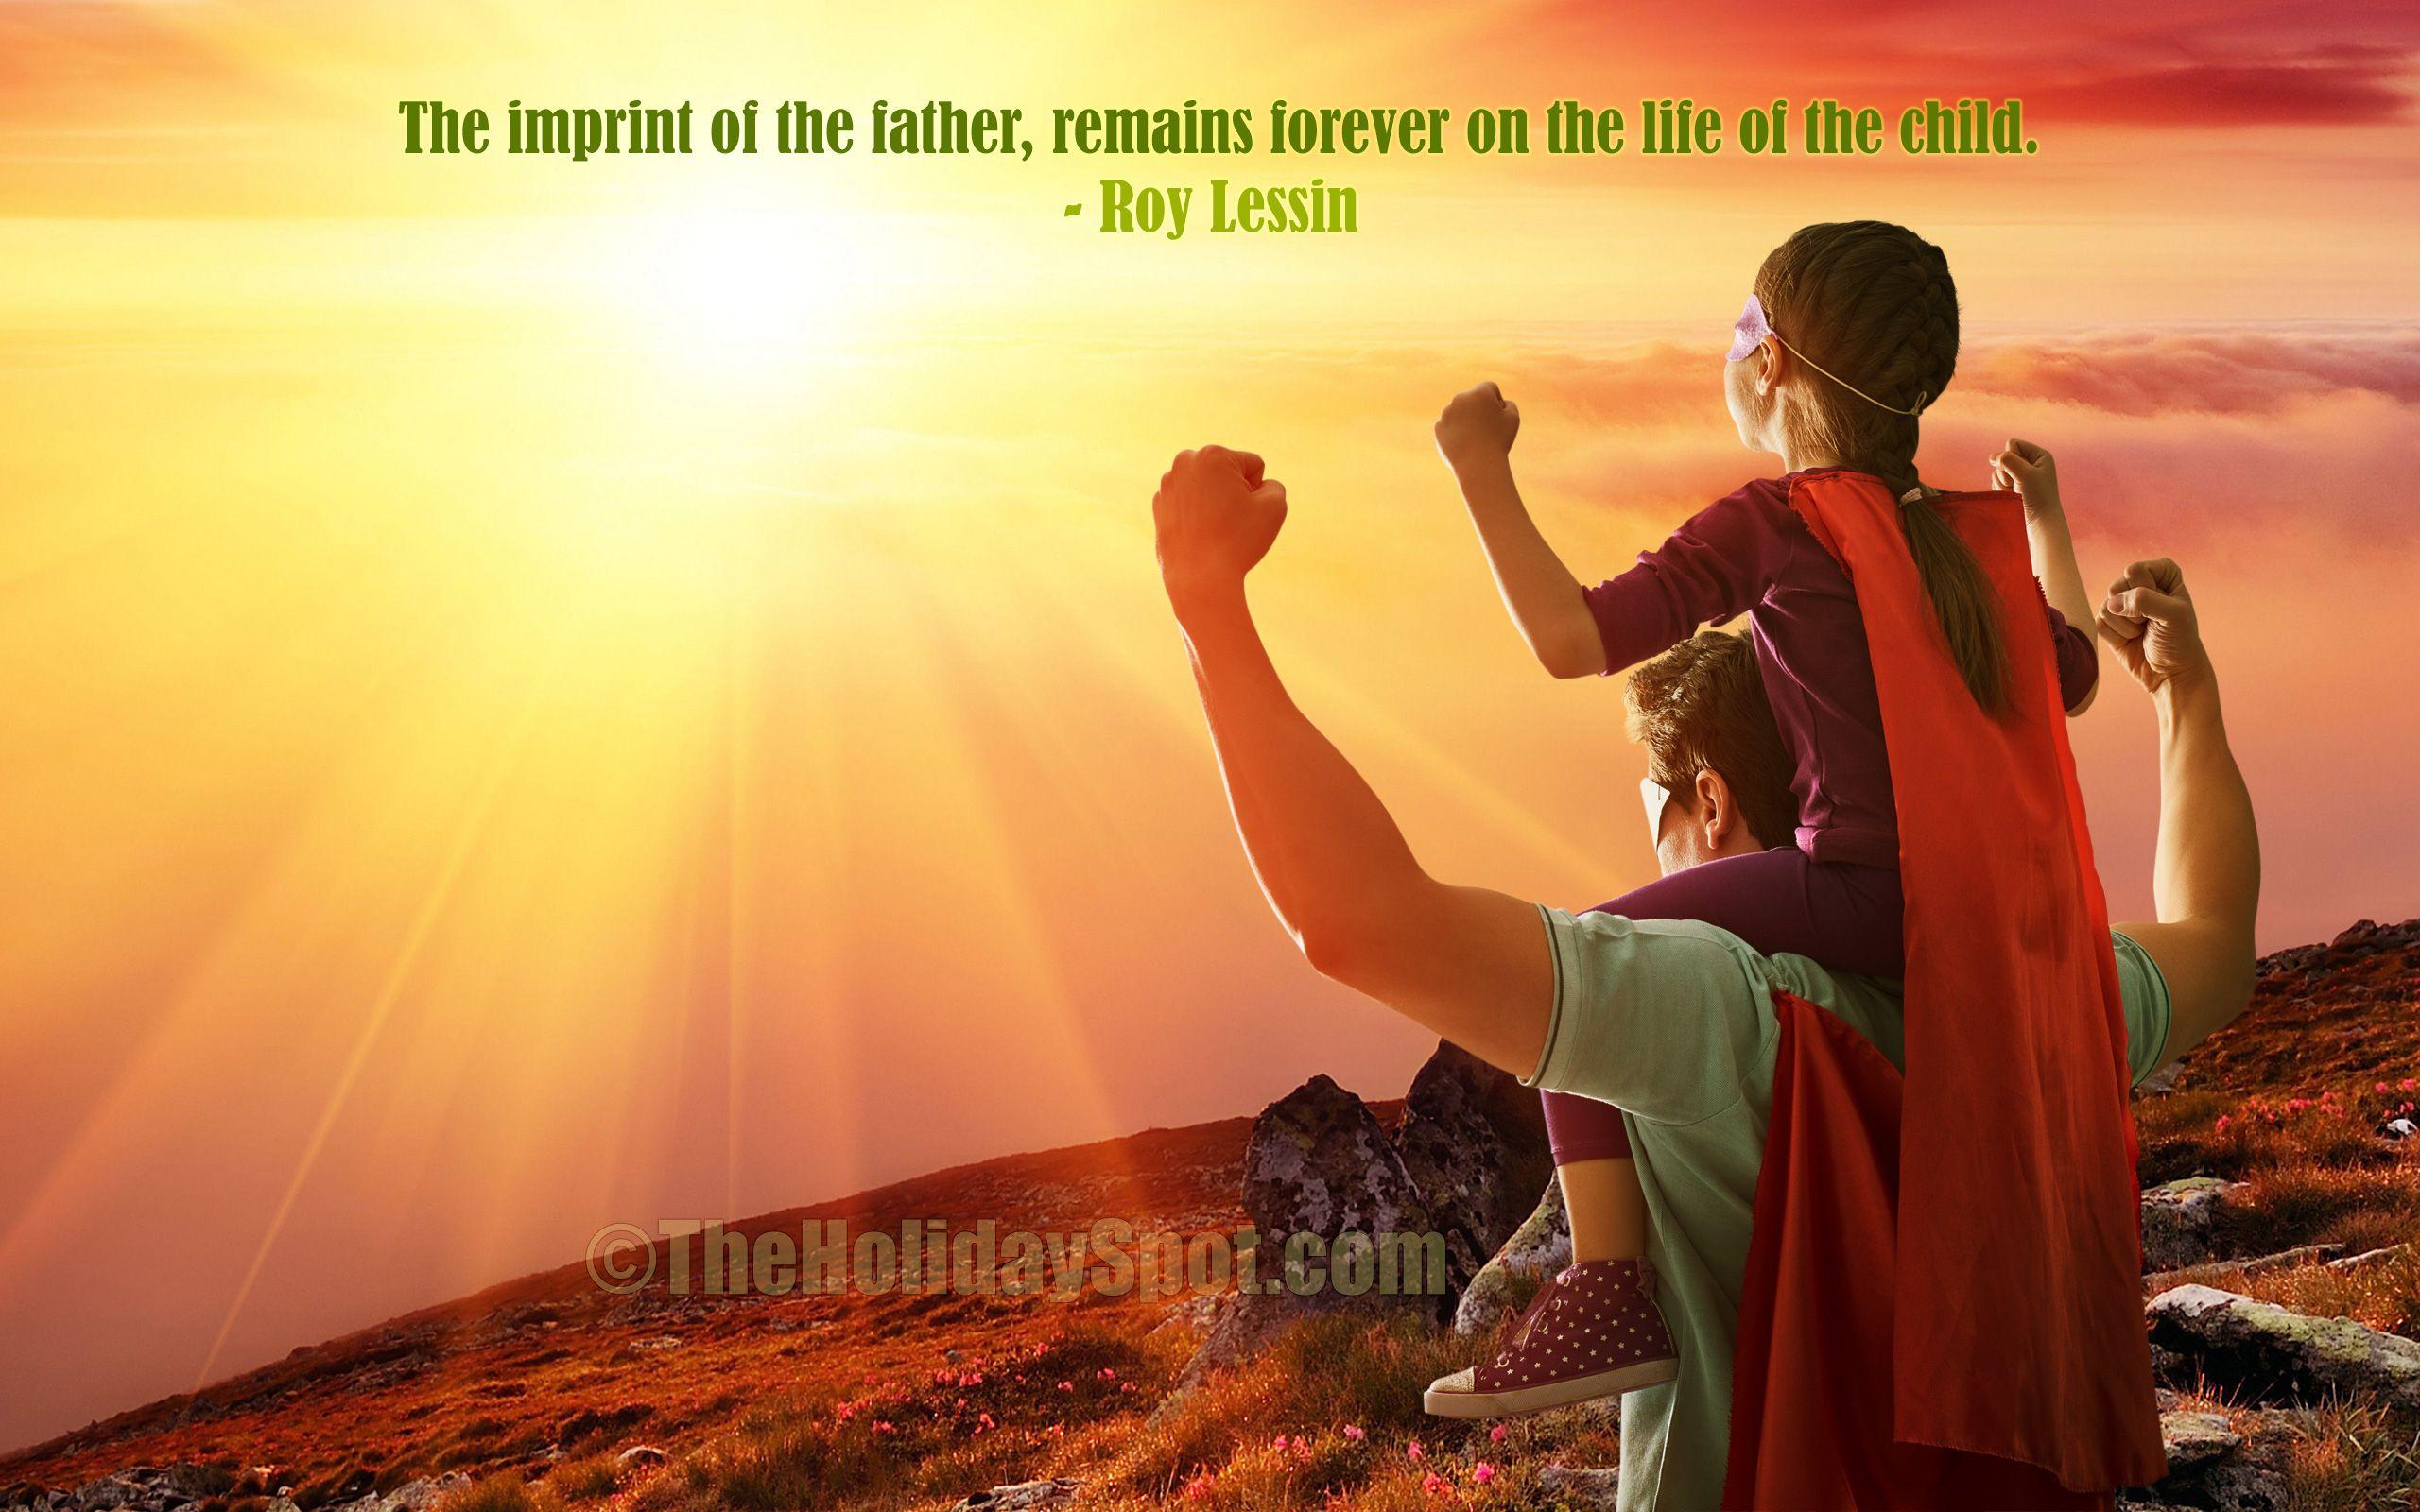 Fathers Day Wallpaper. Fathers Day Image 2021 HD. Happy Fathers Day Image